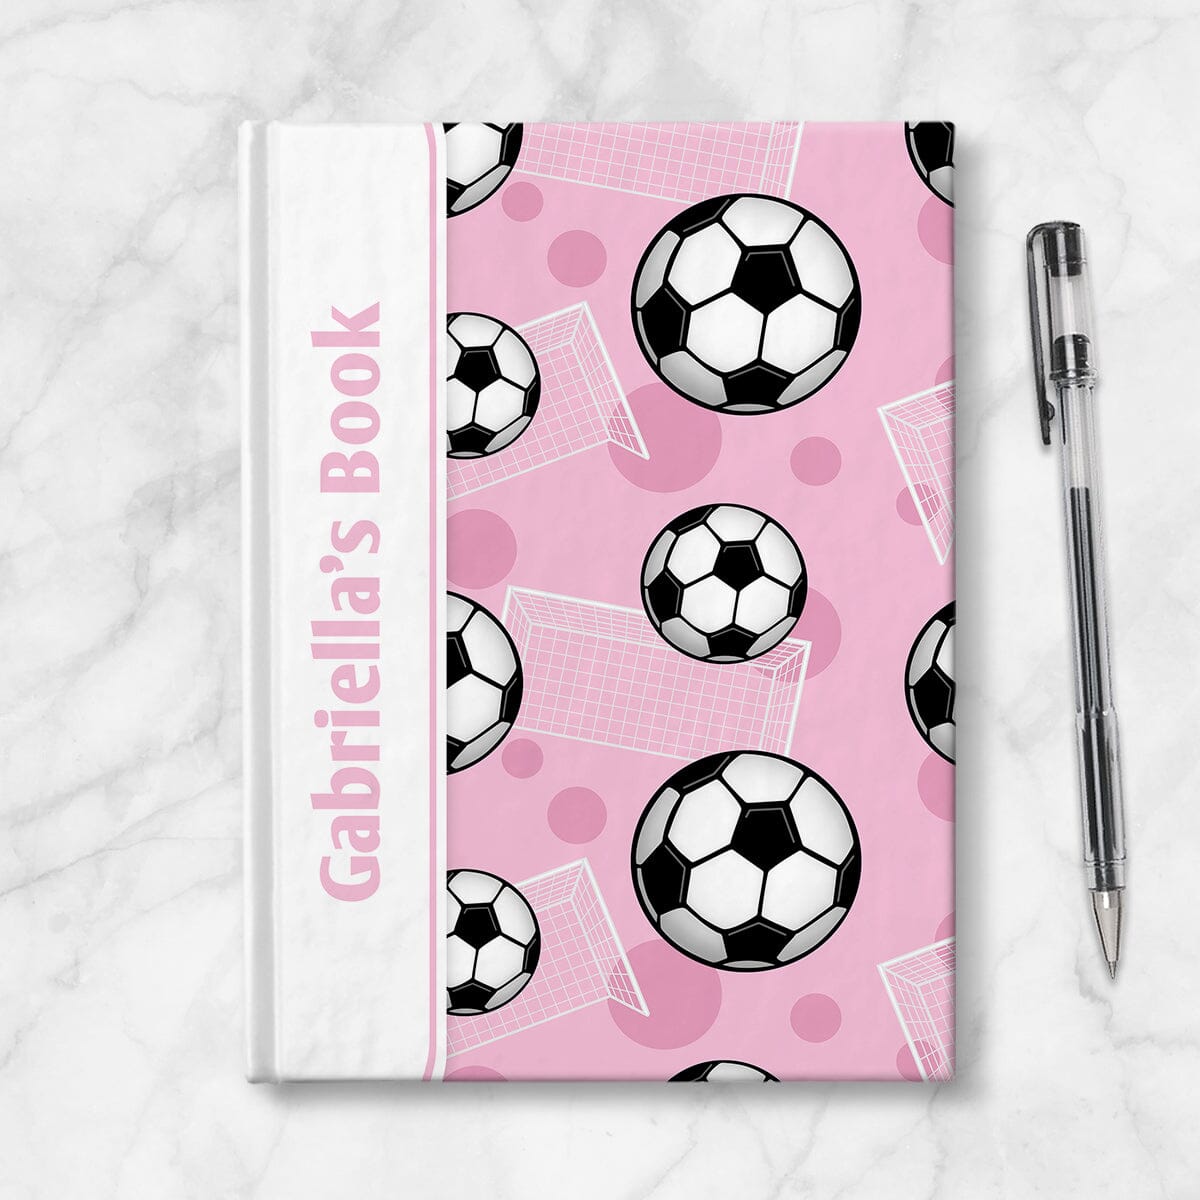 Personalized Pink Soccer Journal at Artistically Invited. Image shows the book on a countertop next to a pen.